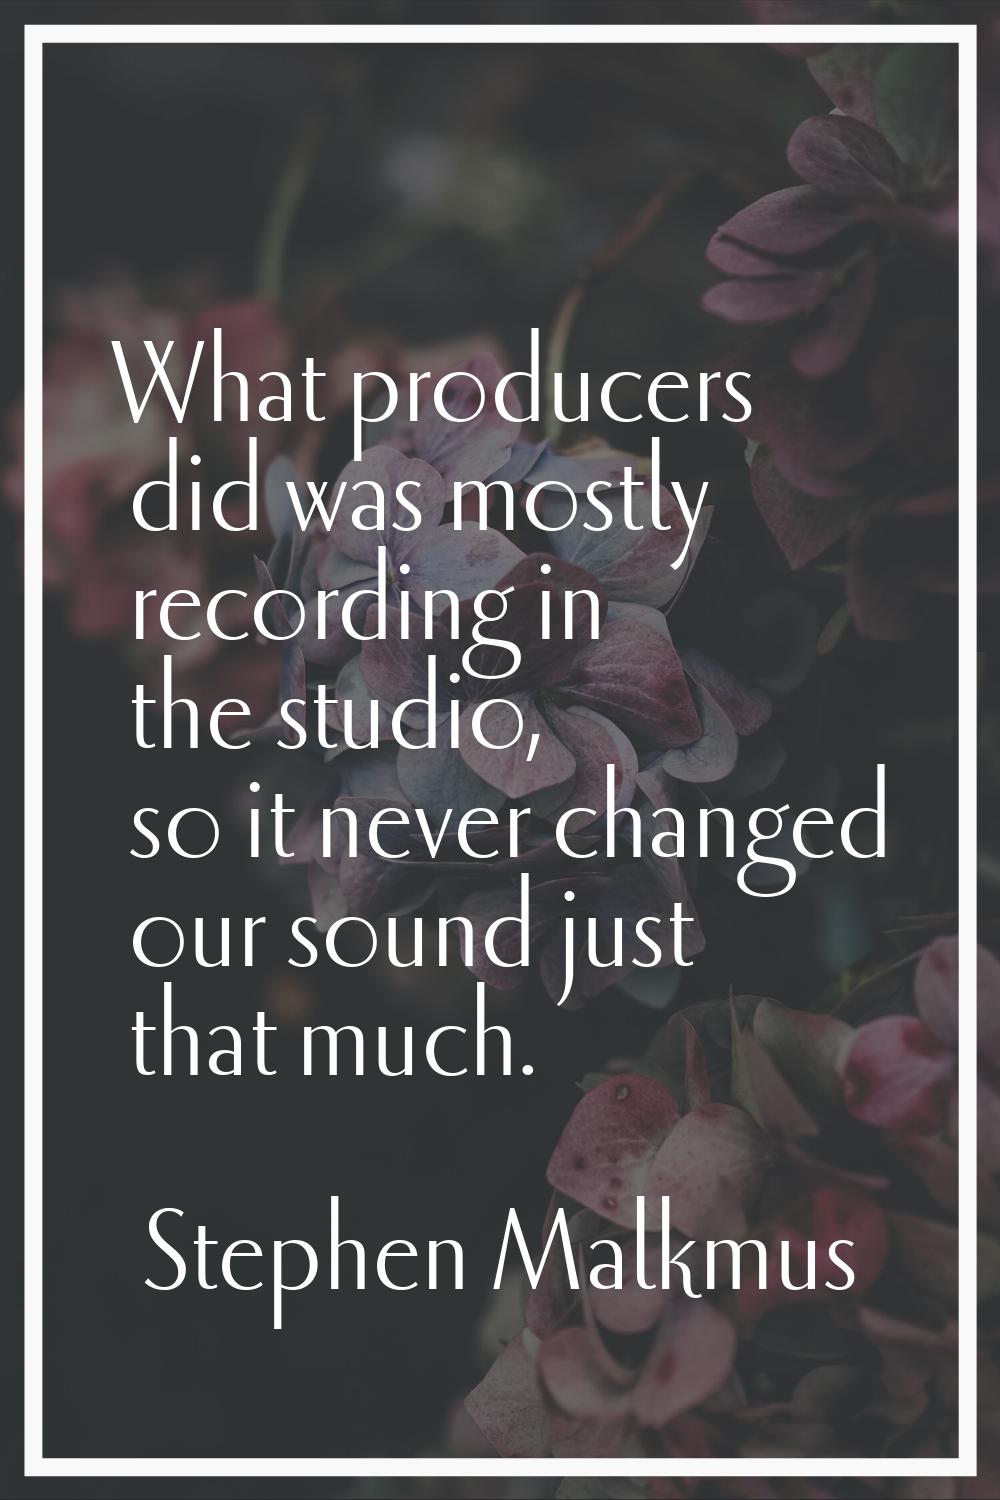 What producers did was mostly recording in the studio, so it never changed our sound just that much